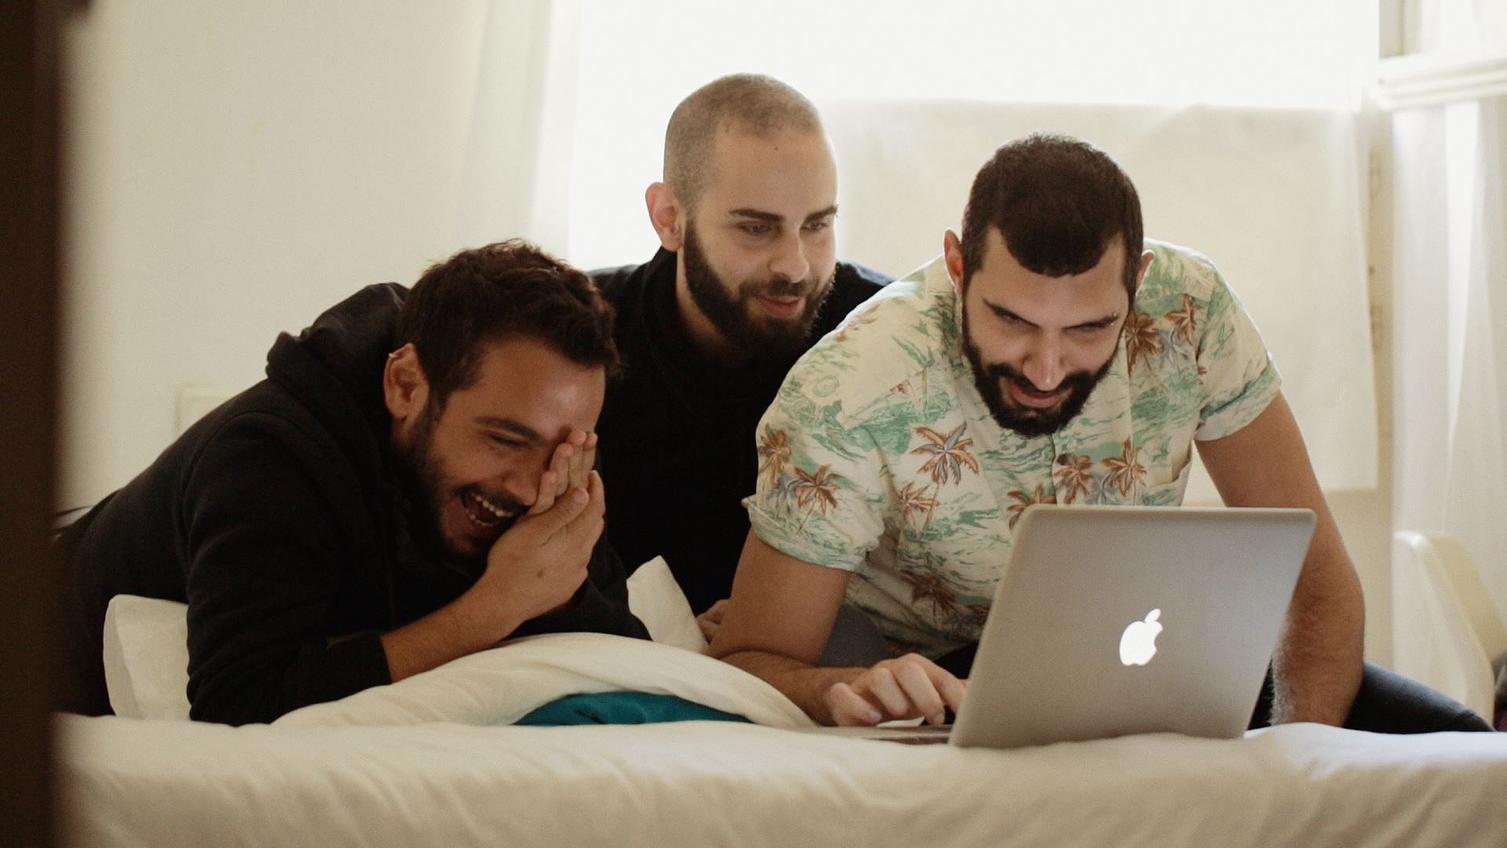 Oriented: A new documentary that sheds light on unheard voices of gay Palestinians